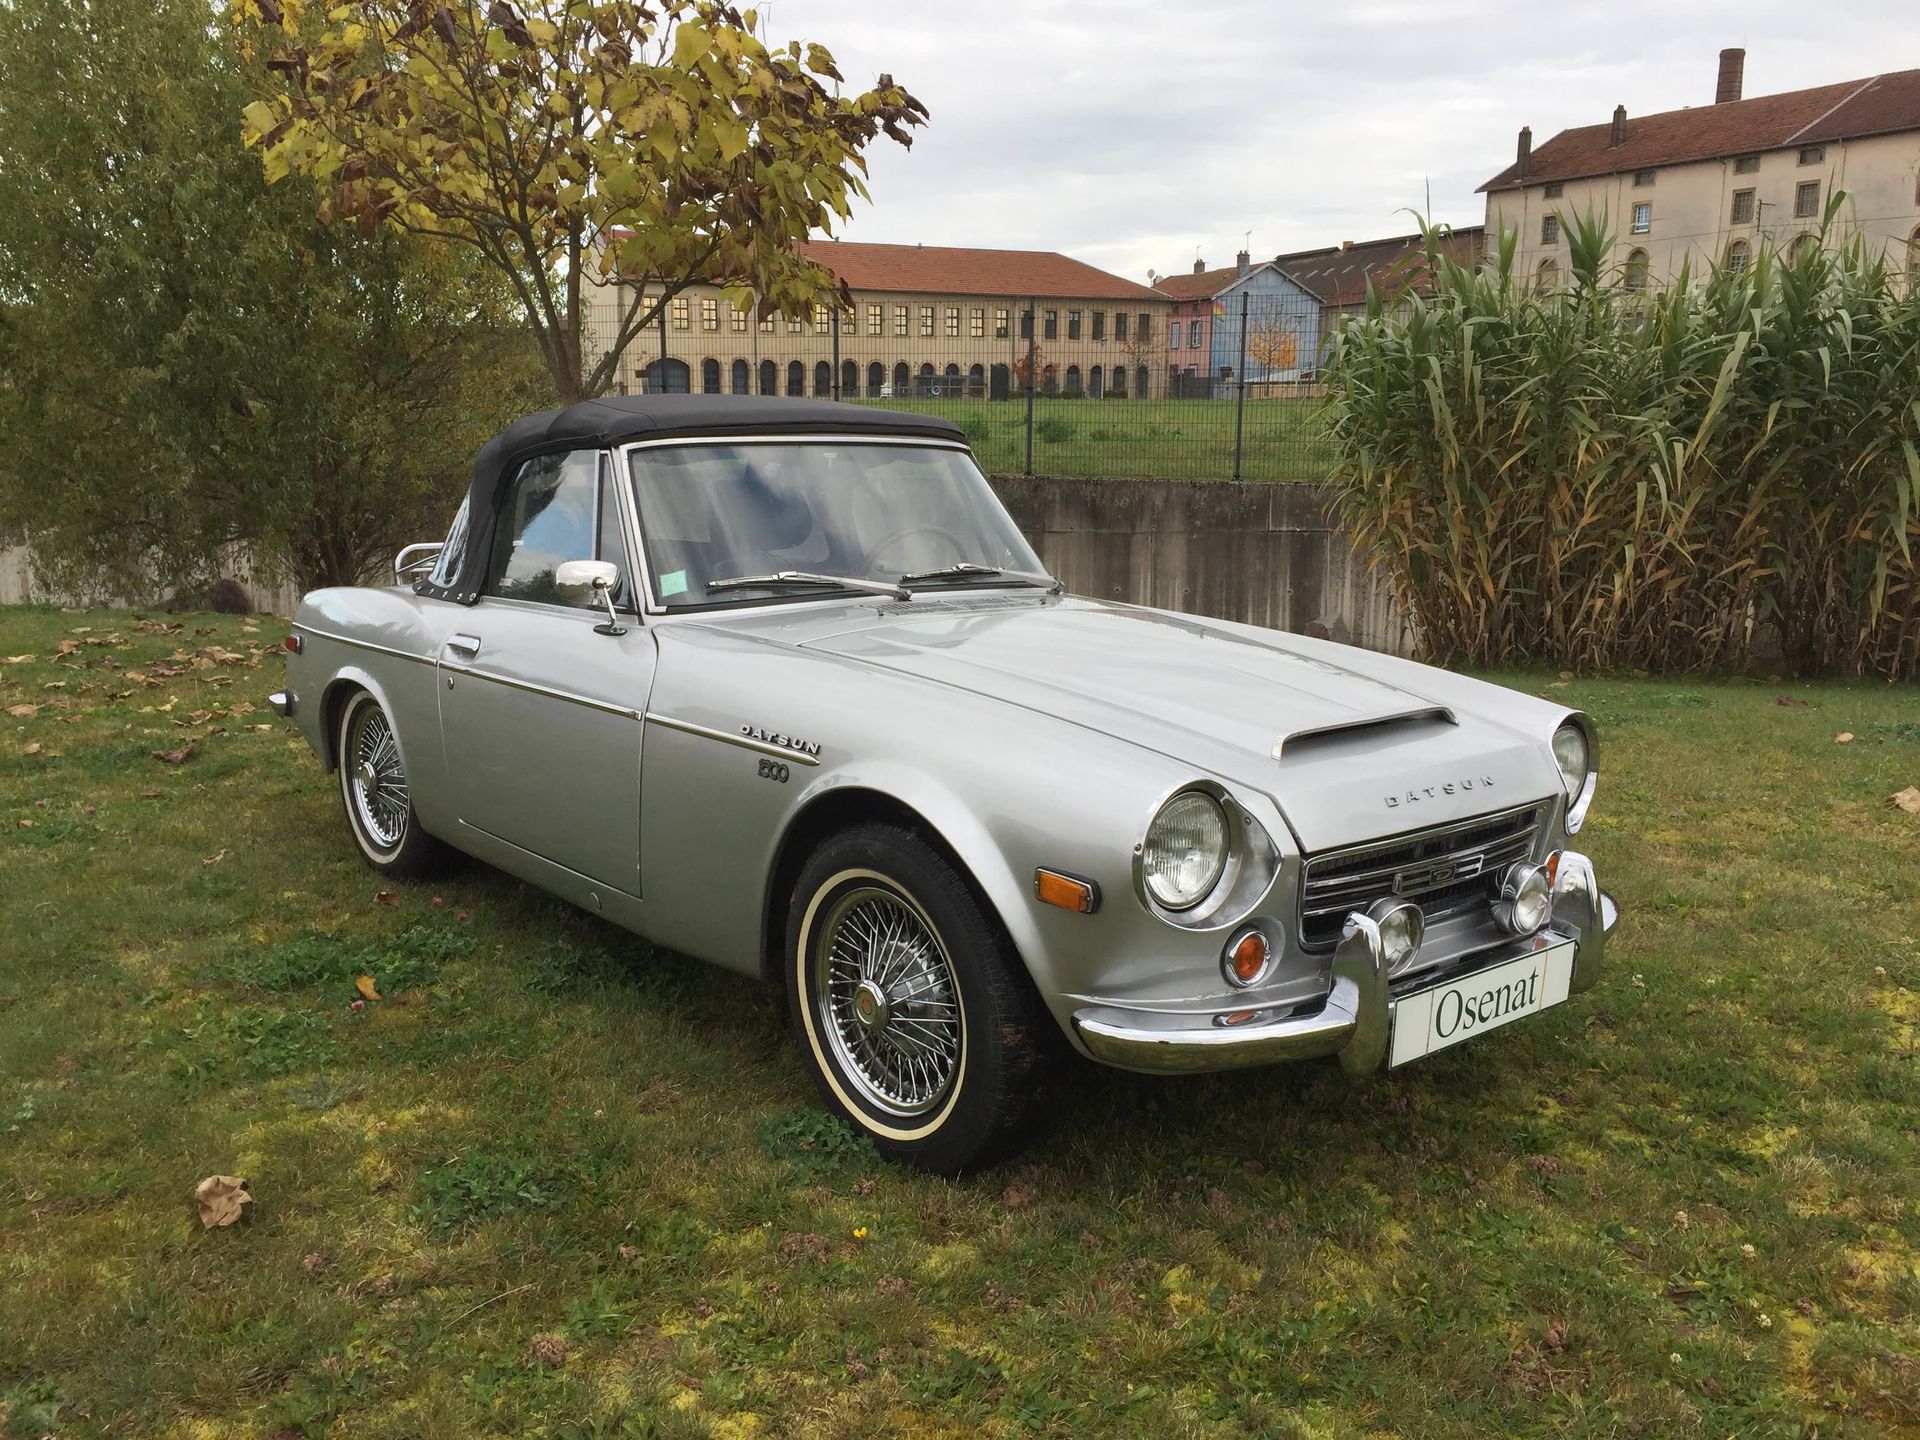 1968 Datsun Fairlady 1600 Sport

Type SPL 311

Serial number : 29777

French CG &hellip;